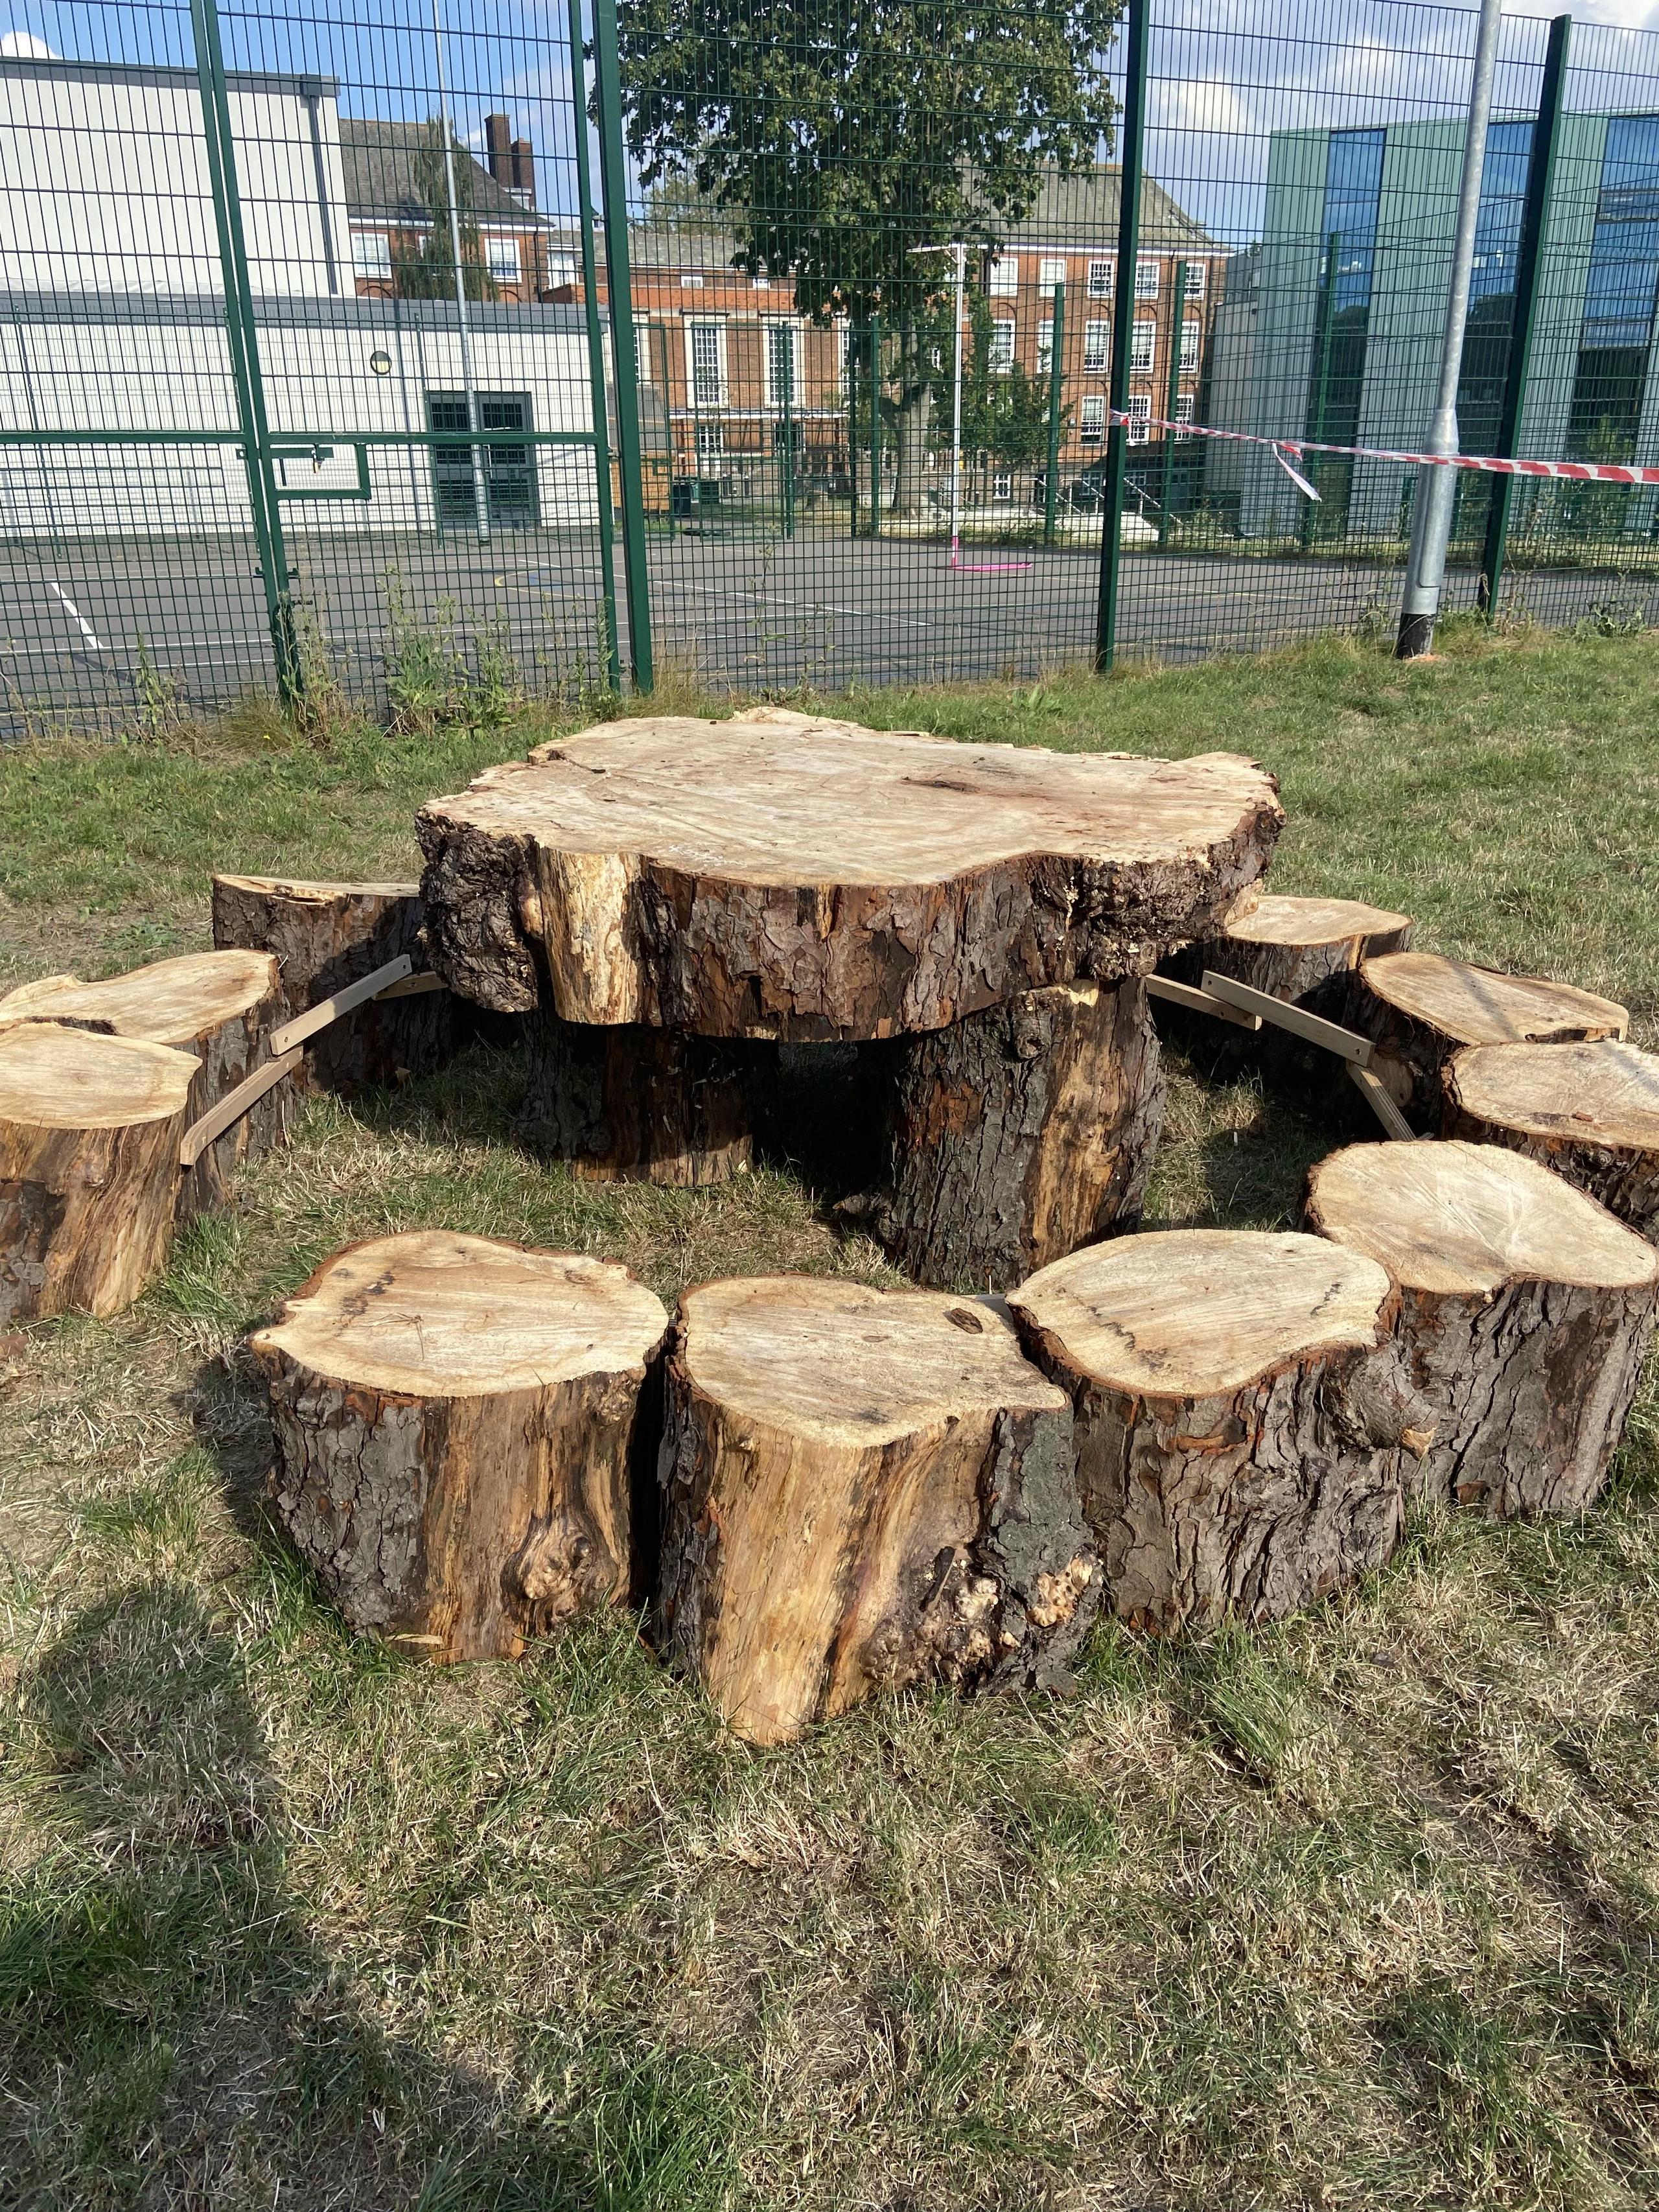 He is using the wood of a felled tree for many creations like this seating area